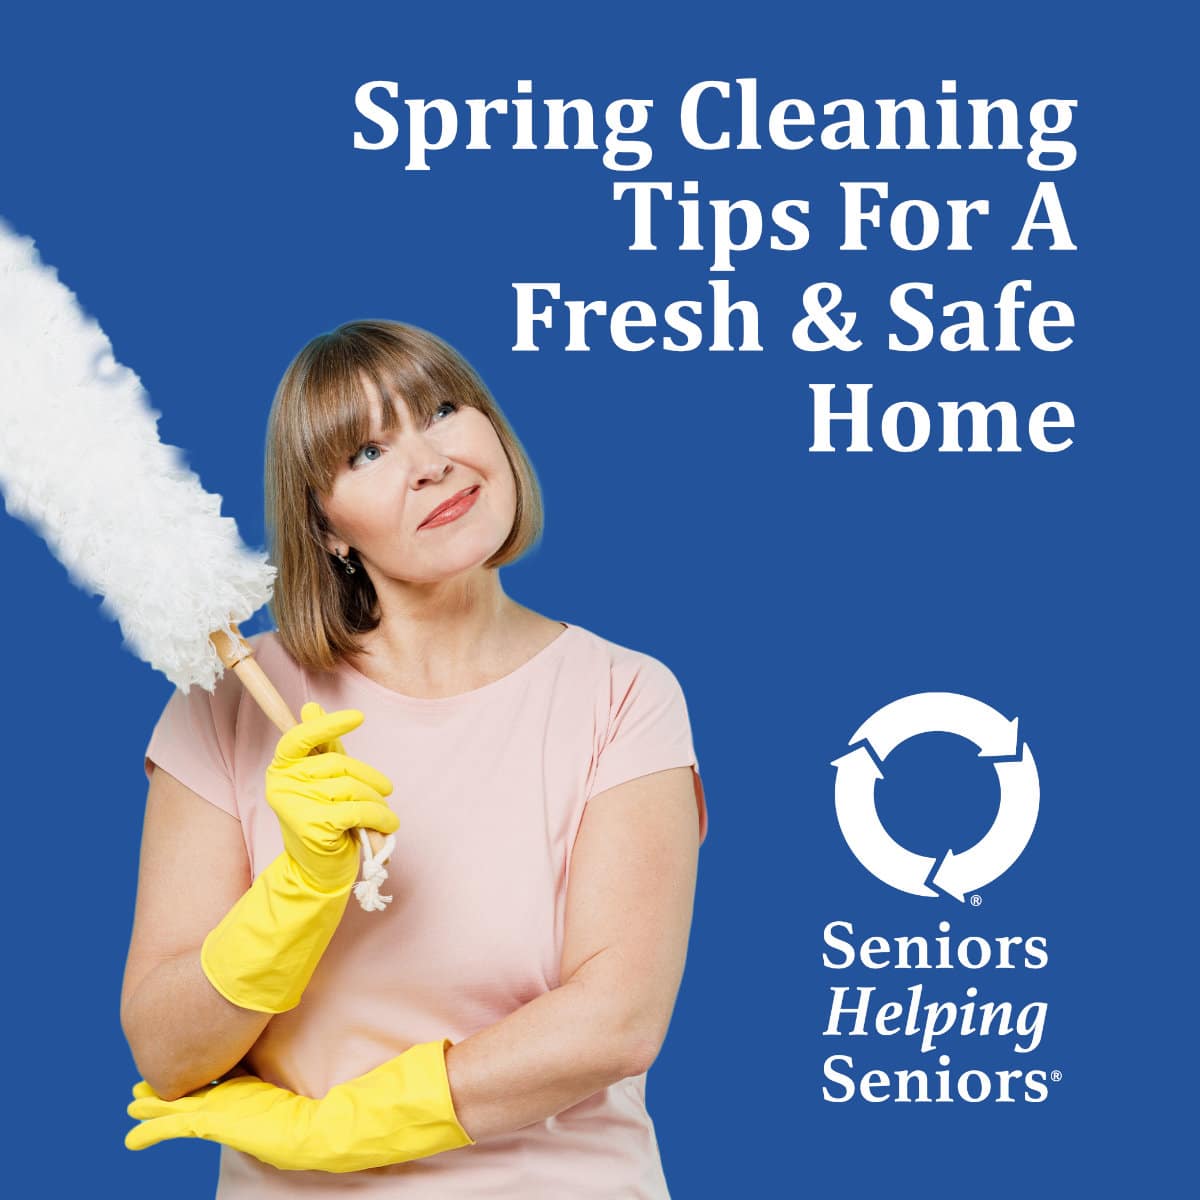 4 Seniors Helping Seniors® Spring Cleaning Tips For A Fresh & Safe Home